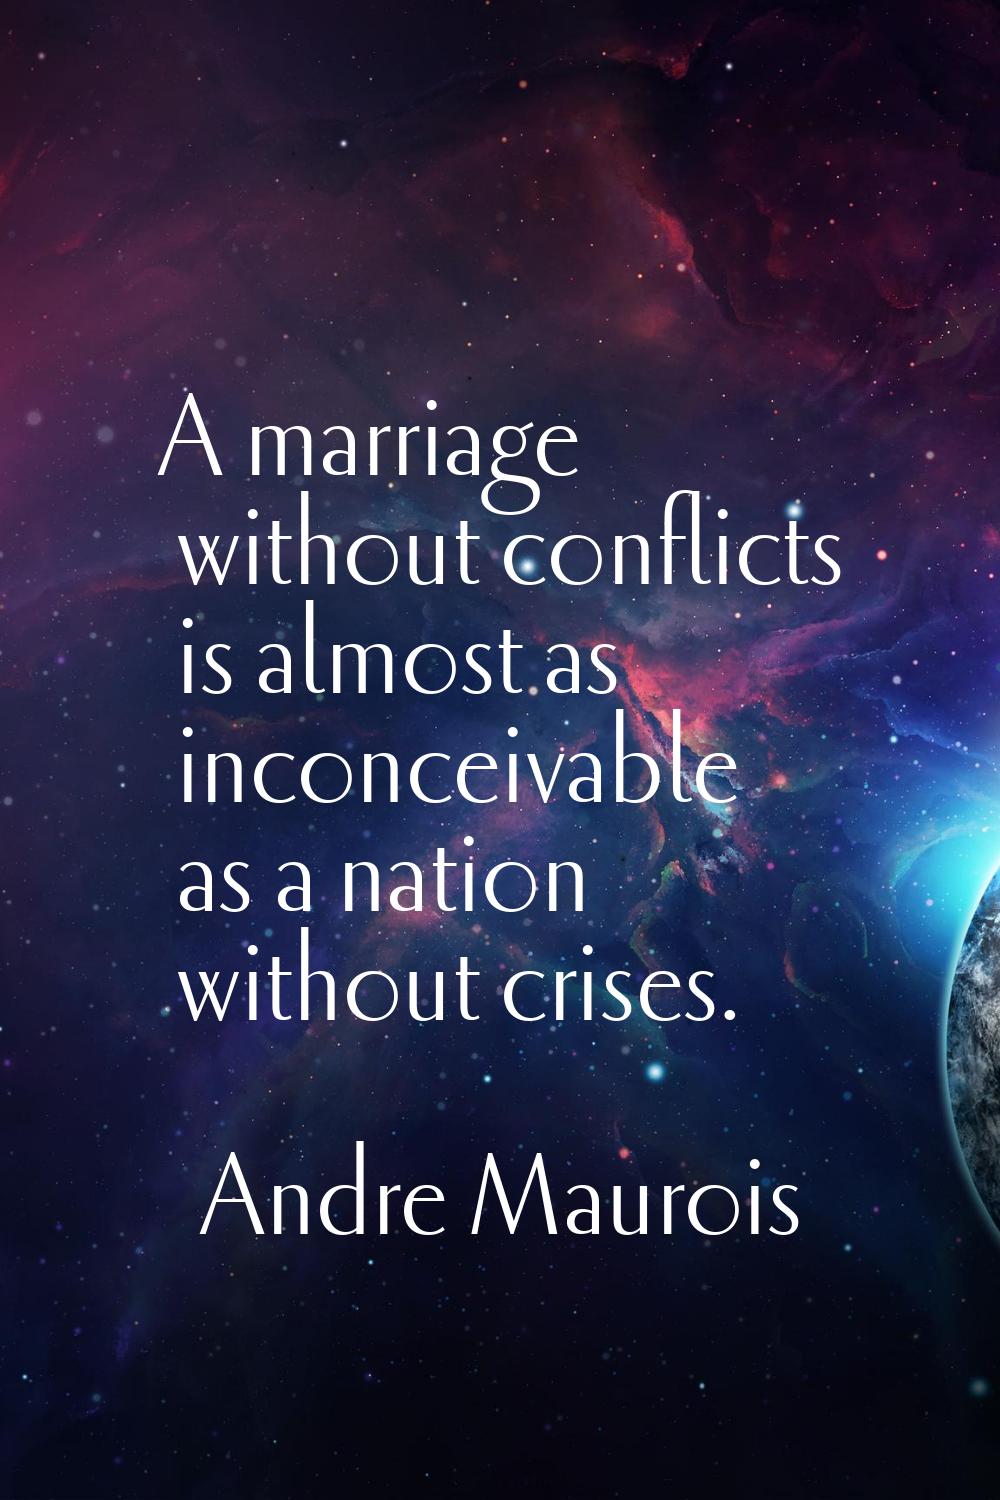 A marriage without conflicts is almost as inconceivable as a nation without crises.